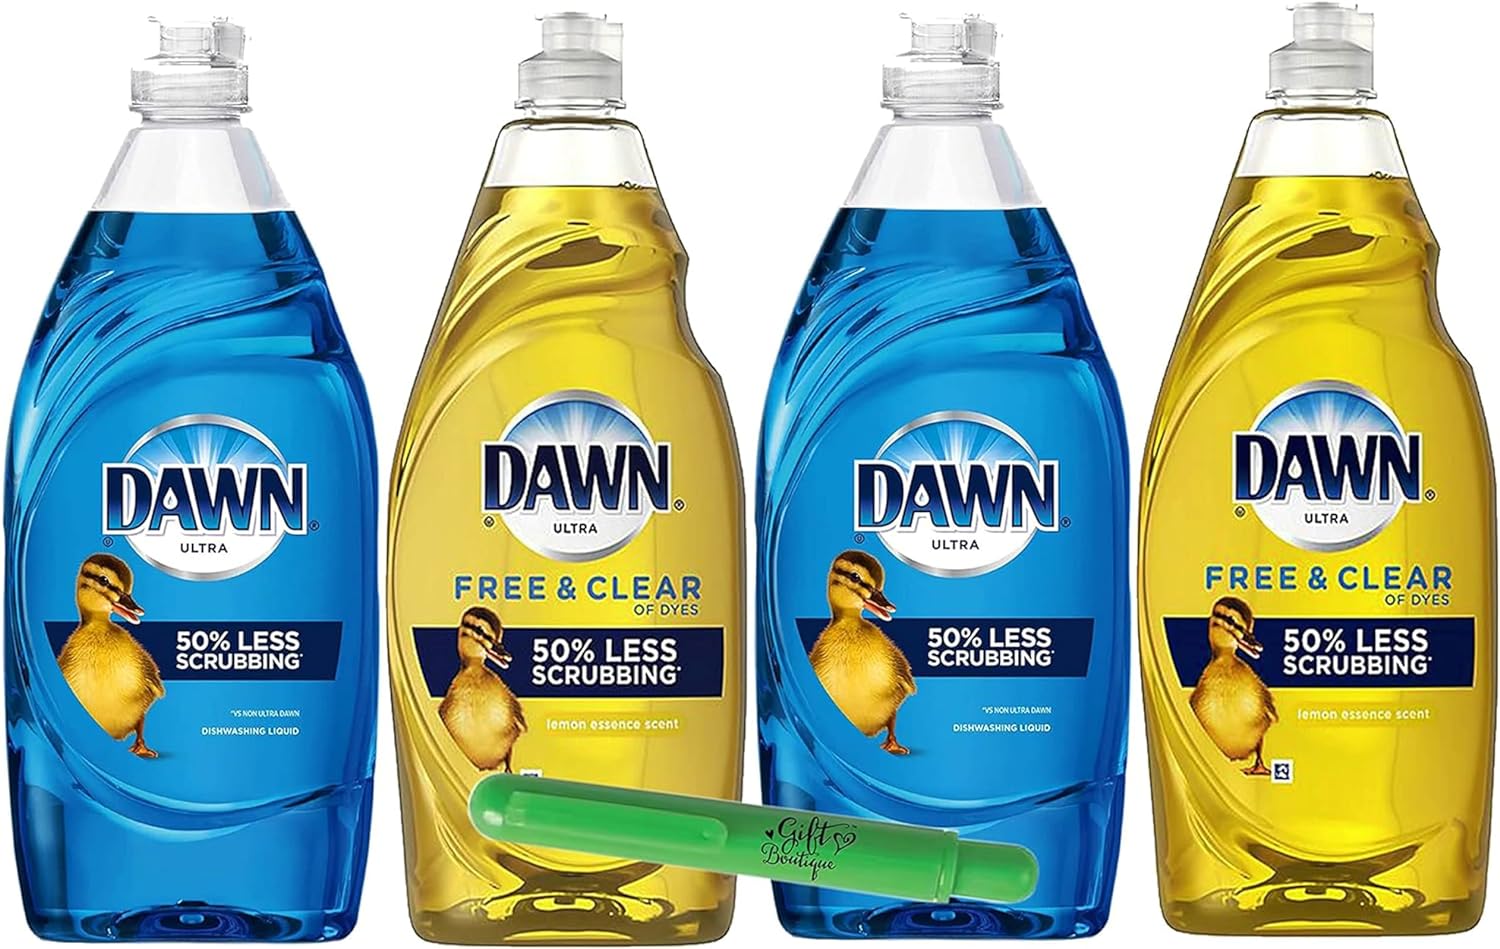 Dawn Dishwashing Liquid Dish Soap, 7.5 Ounce Squeeze Bottle Assorted Scents- Fresh Original and Lemon Dawn Dish Soap with Gift Boutique Lint Stick, 4 Pack